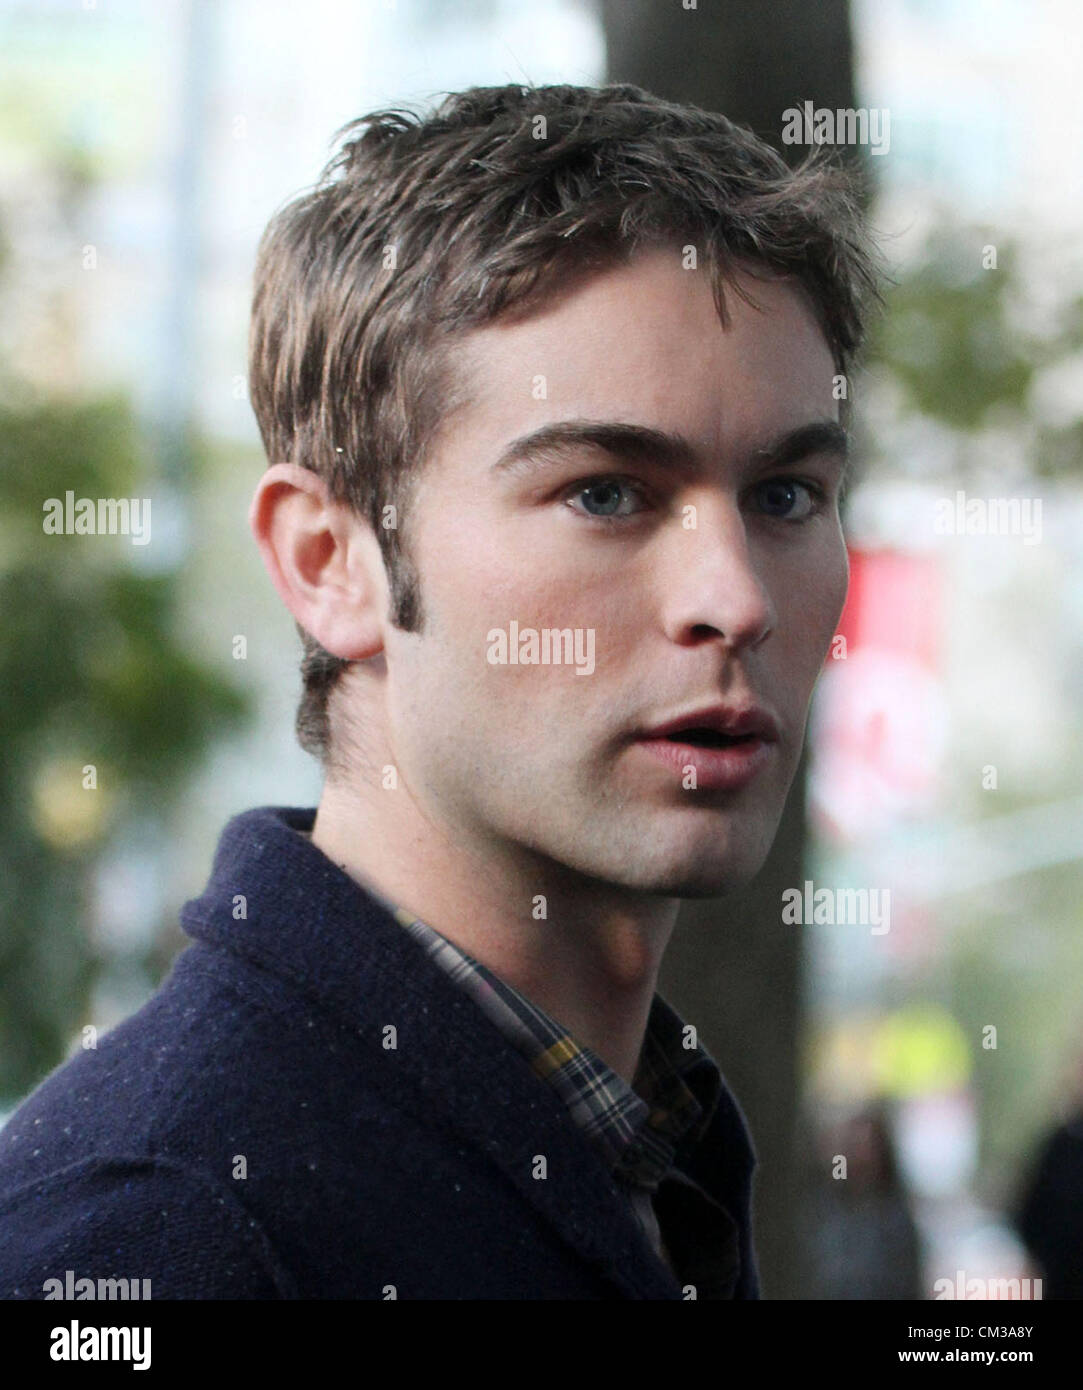 Sept. 24, 2012 - New York, New York, U.S. - Actor CHACE CRAWFORD films a scene from hIS TV show 'Gossip Girl' on the Upper West Side. (Credit Image: © Nancy Kaszerman/ZUMAPRESS.com) Stock Photo